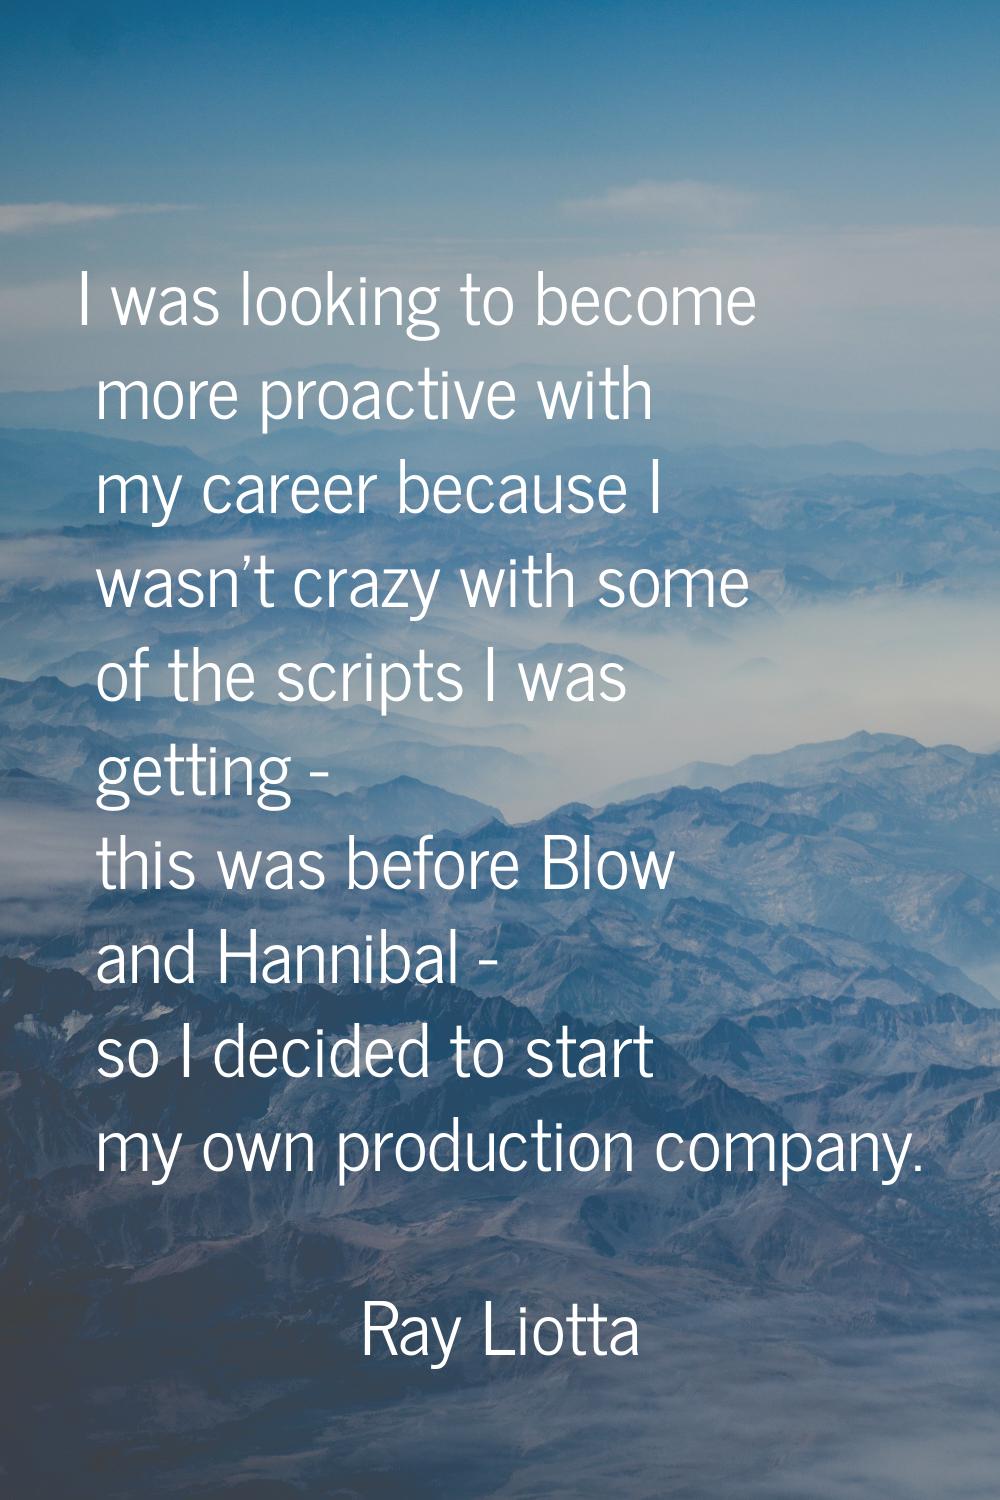 I was looking to become more proactive with my career because I wasn't crazy with some of the scrip